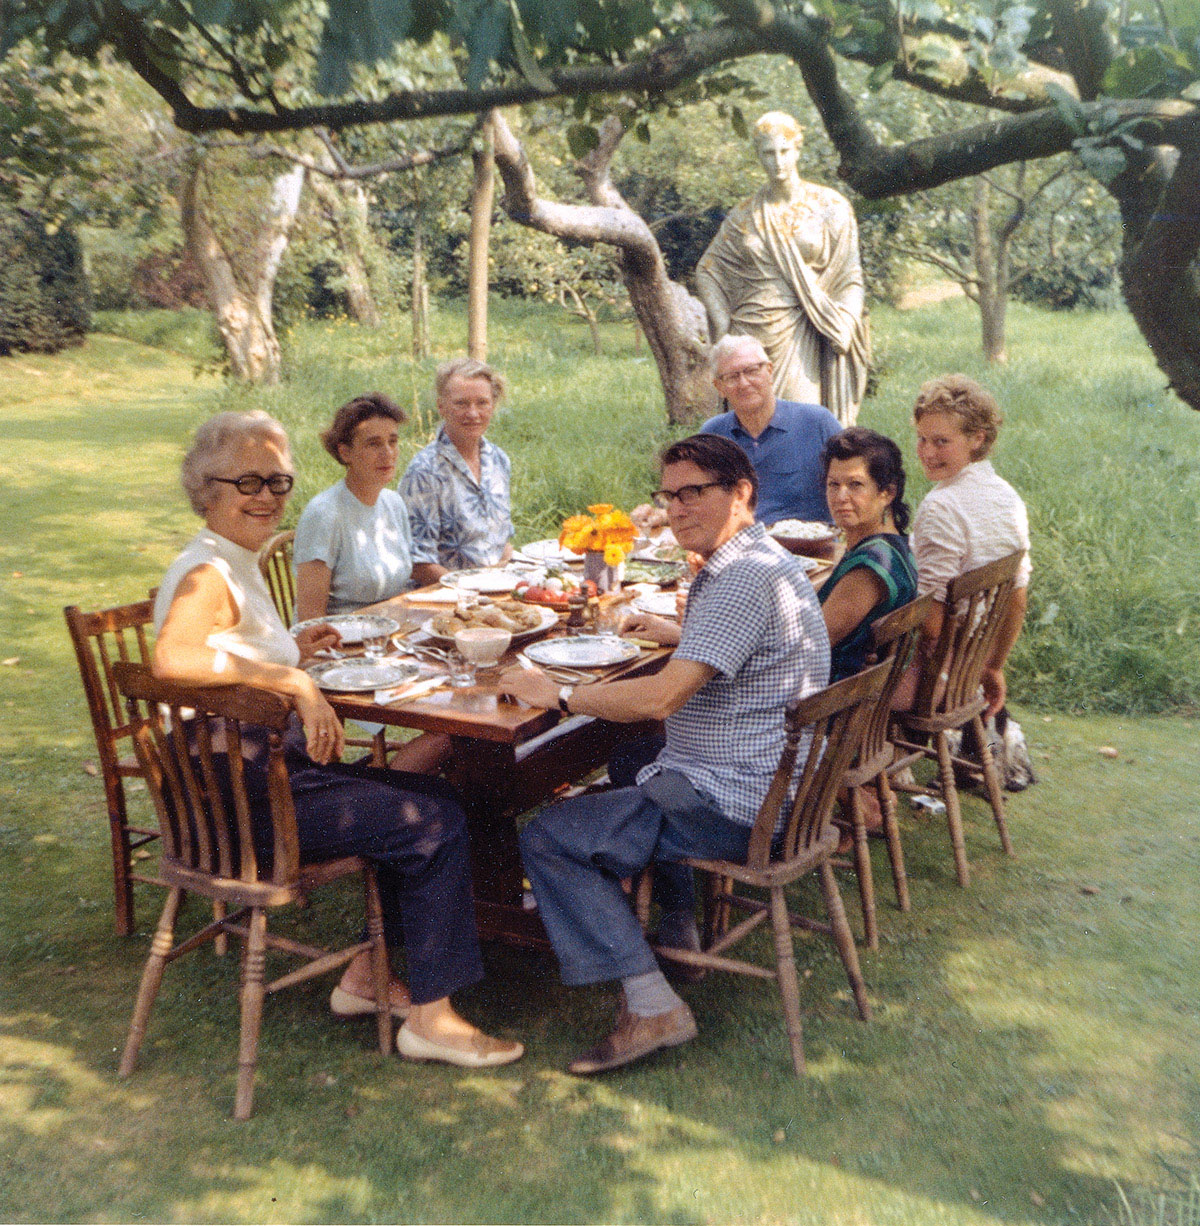 Lee Miller and friends seated at outdoor table in her Farleys House garden (circa 1960).